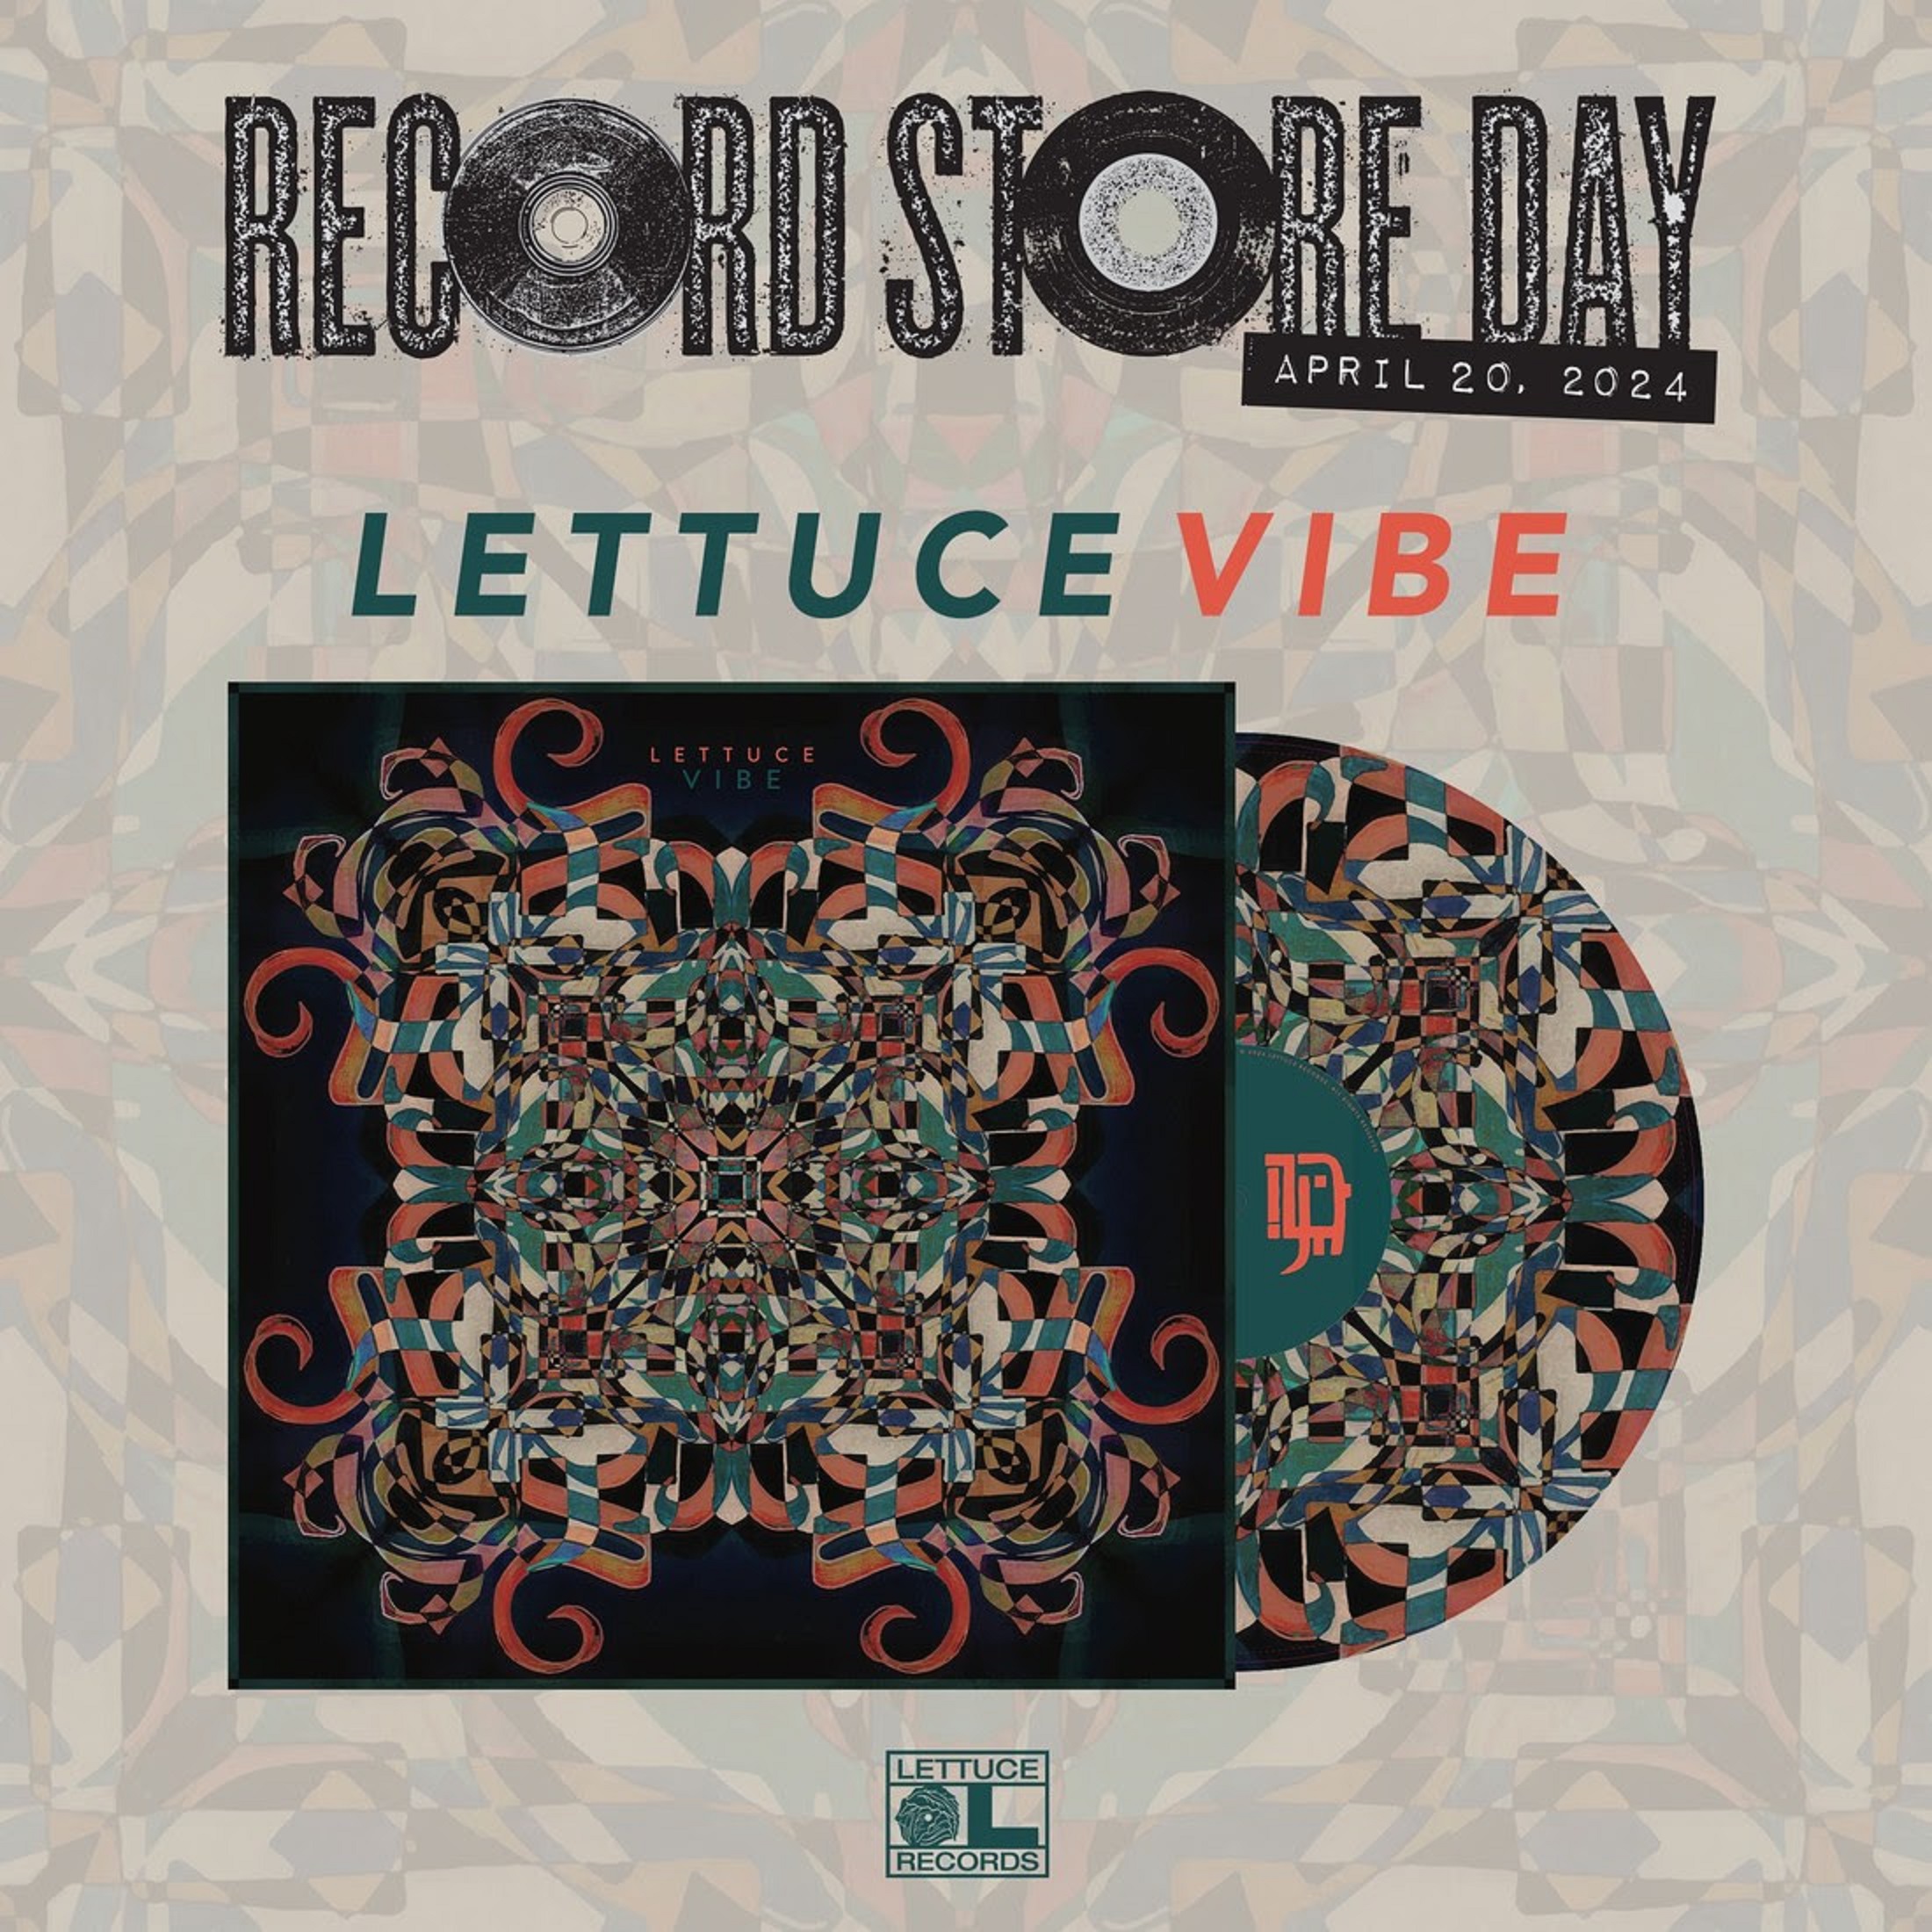 Lettuce Announce Special Edition Picture-Disc LP of 'VIBE' Available Exclusively for Record Store Day on April 20